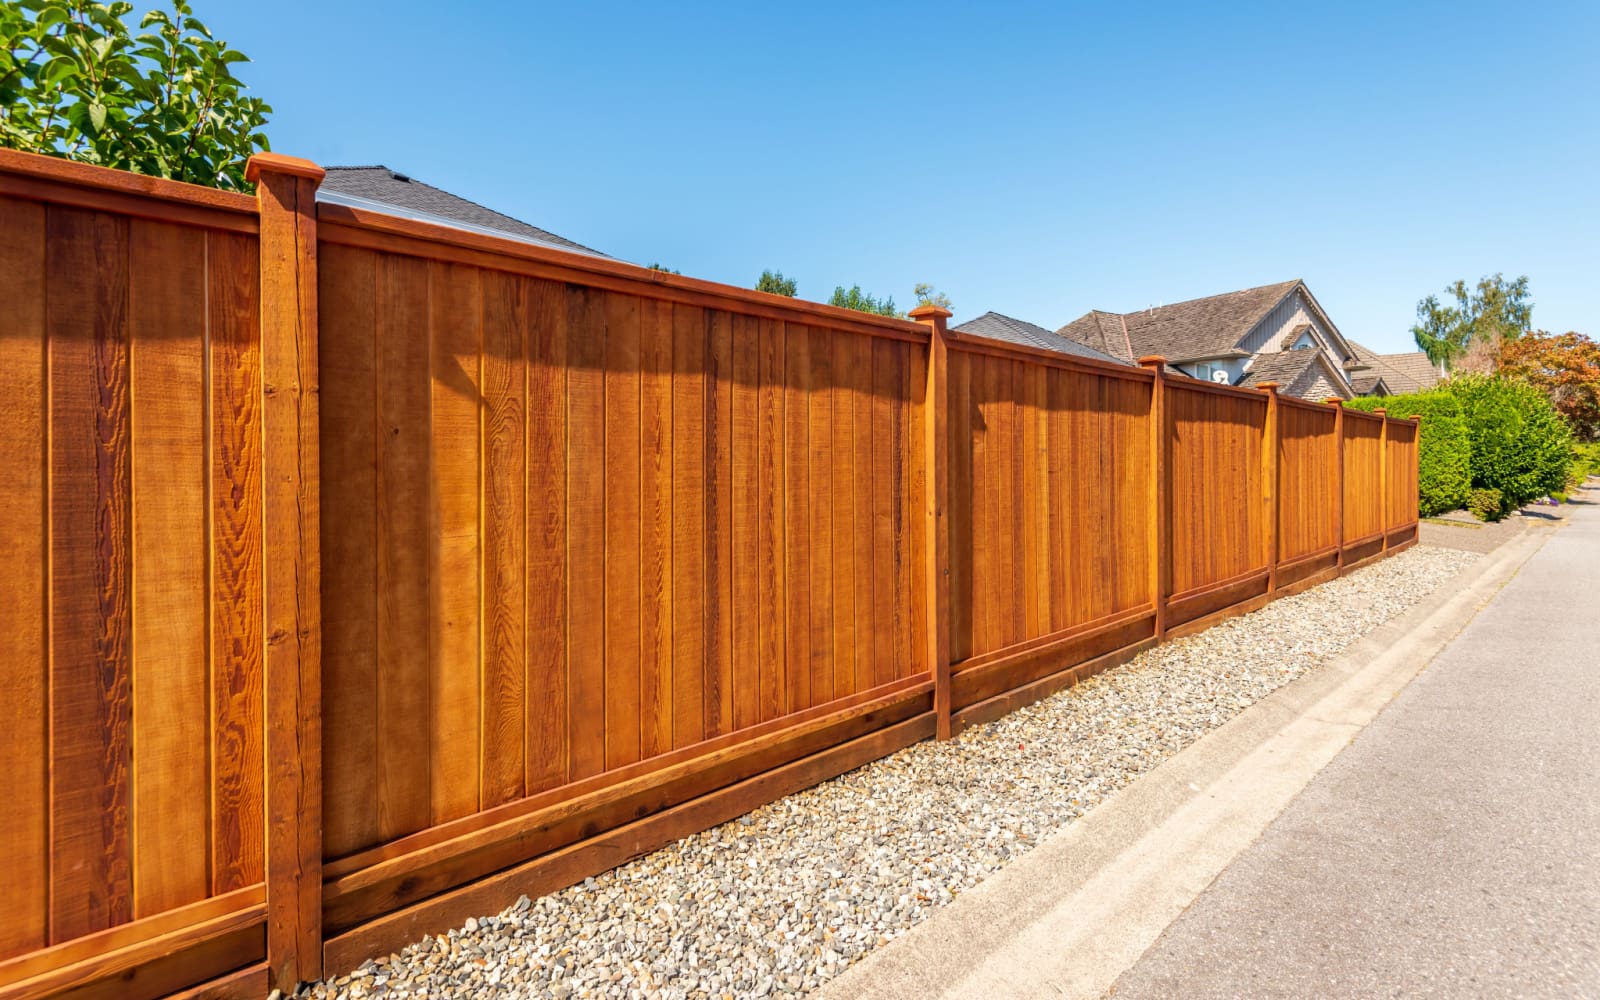 The 10 Types of Fences for a Yard in 2023